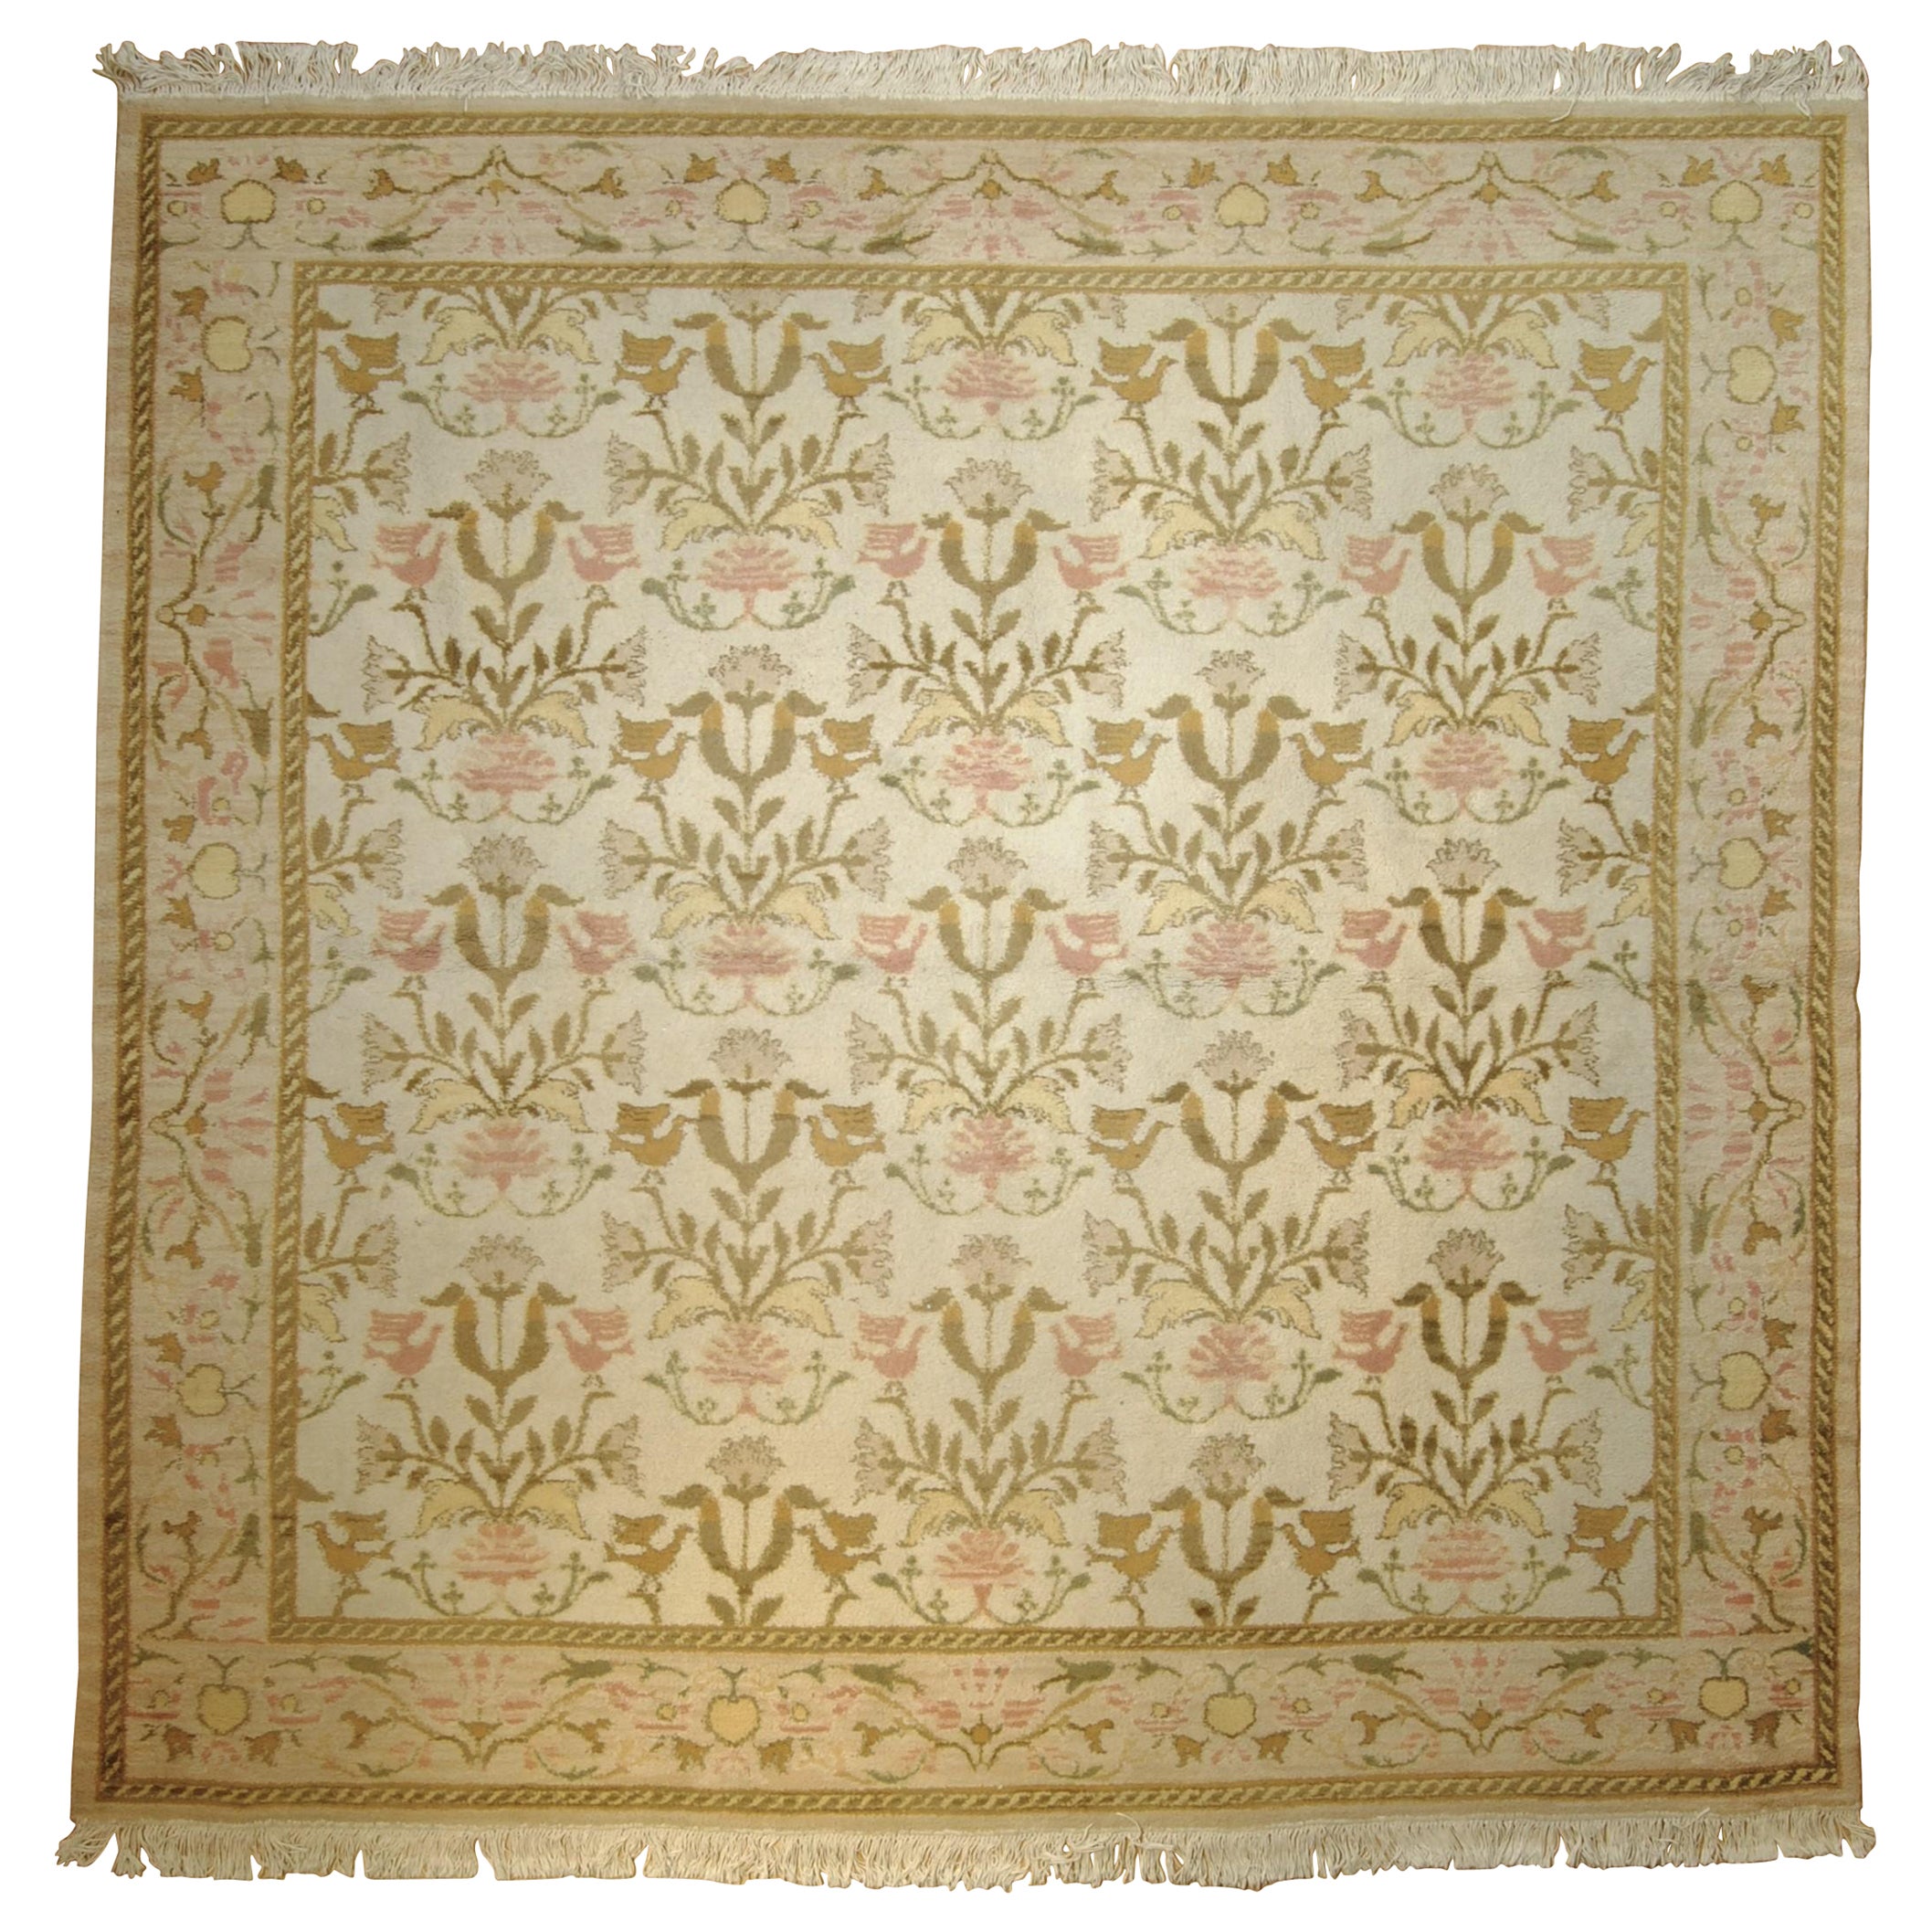 Savonnerie Square Carpet Spain Early 20th Century For Sale